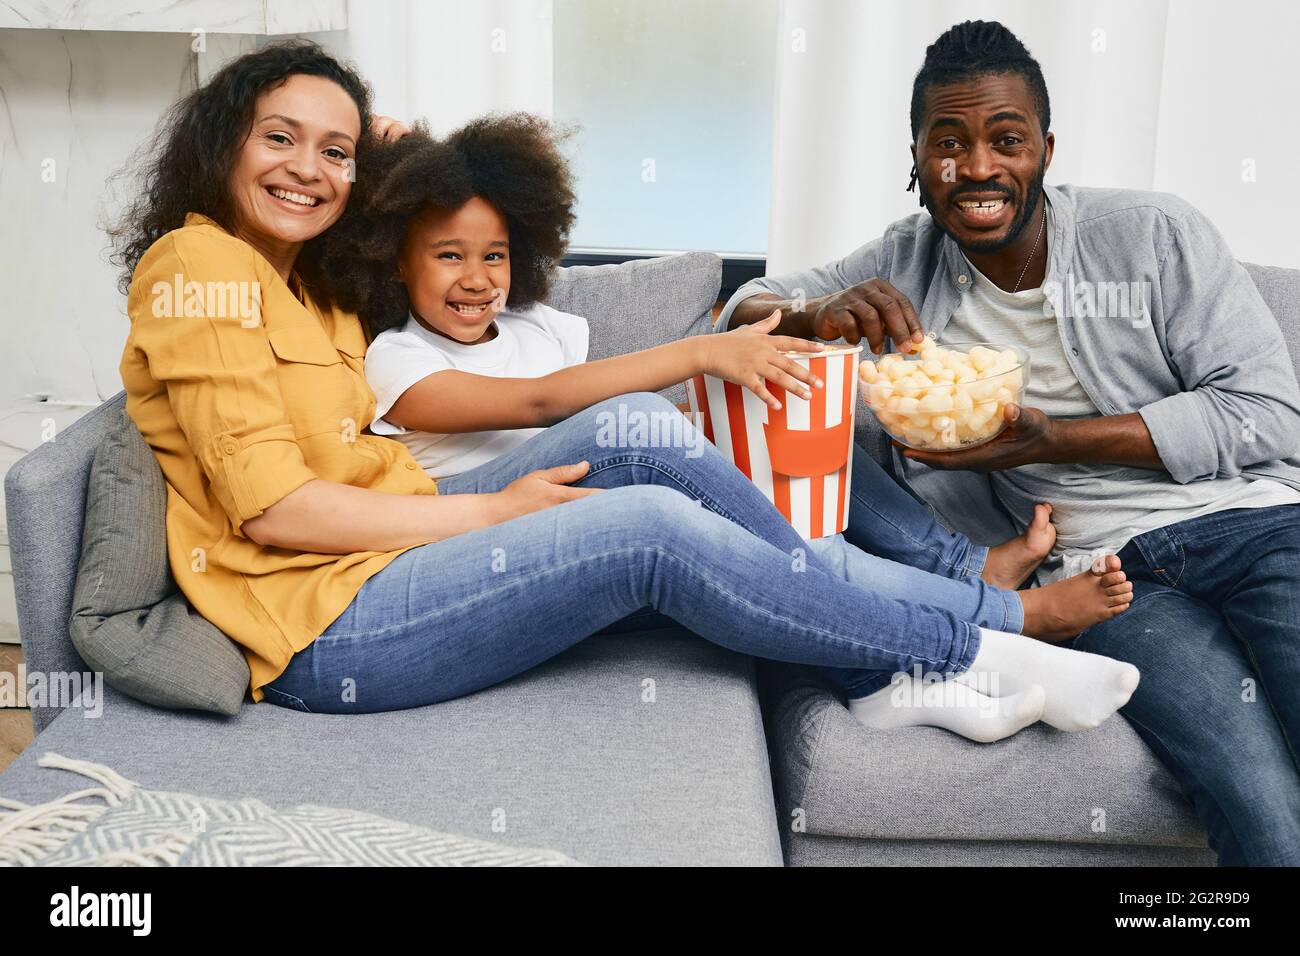 Happy African American family enjoying watching a movie in their home on TV Stock Photo